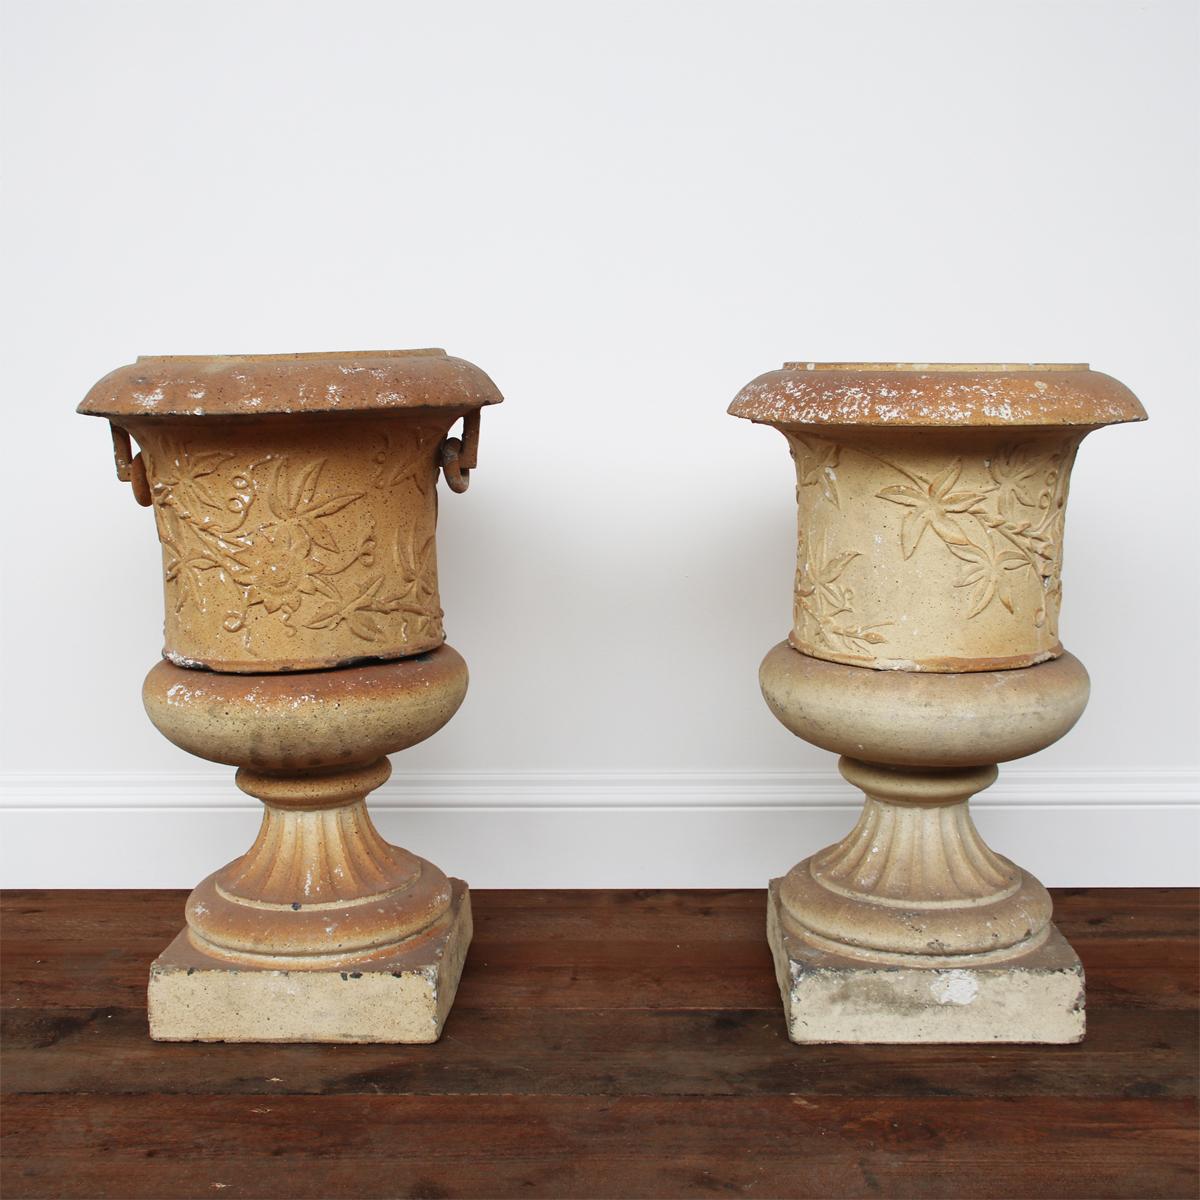 A pair of Victorian clay garden urns on pedestals by the Garnkirk Fireclay Company of Lanarkshire, decorated with a continuous band of passion flowers. One urn is missing its ring handles.

Measures: Overall 48cm diameter x 76cm high. Base 33cm